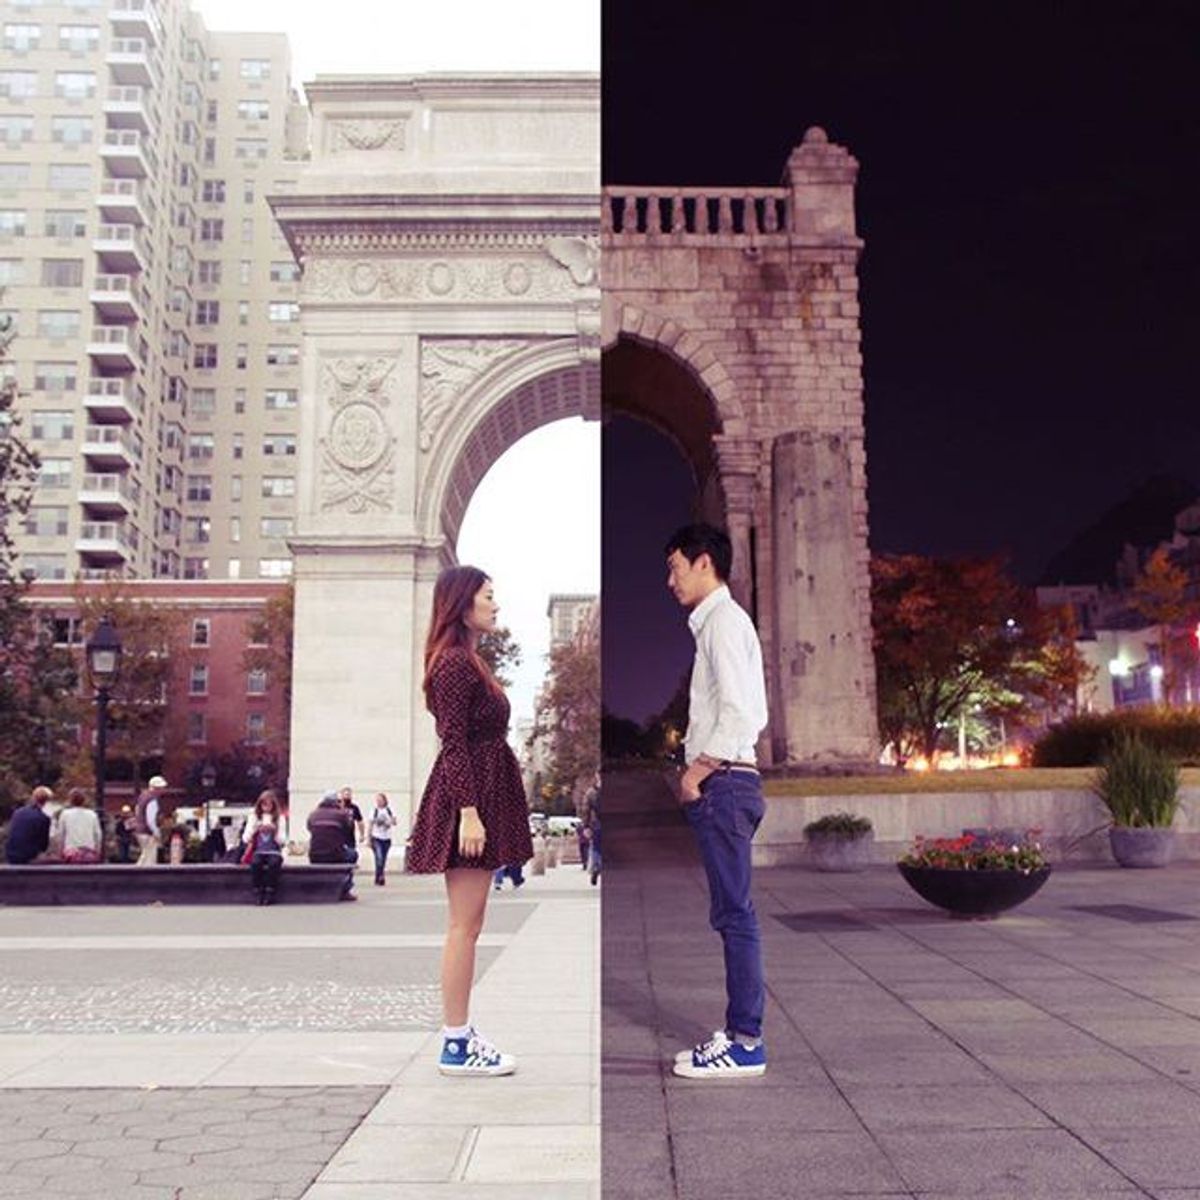 10 Things No One Tells You About Being In A Long-Distance Relationship